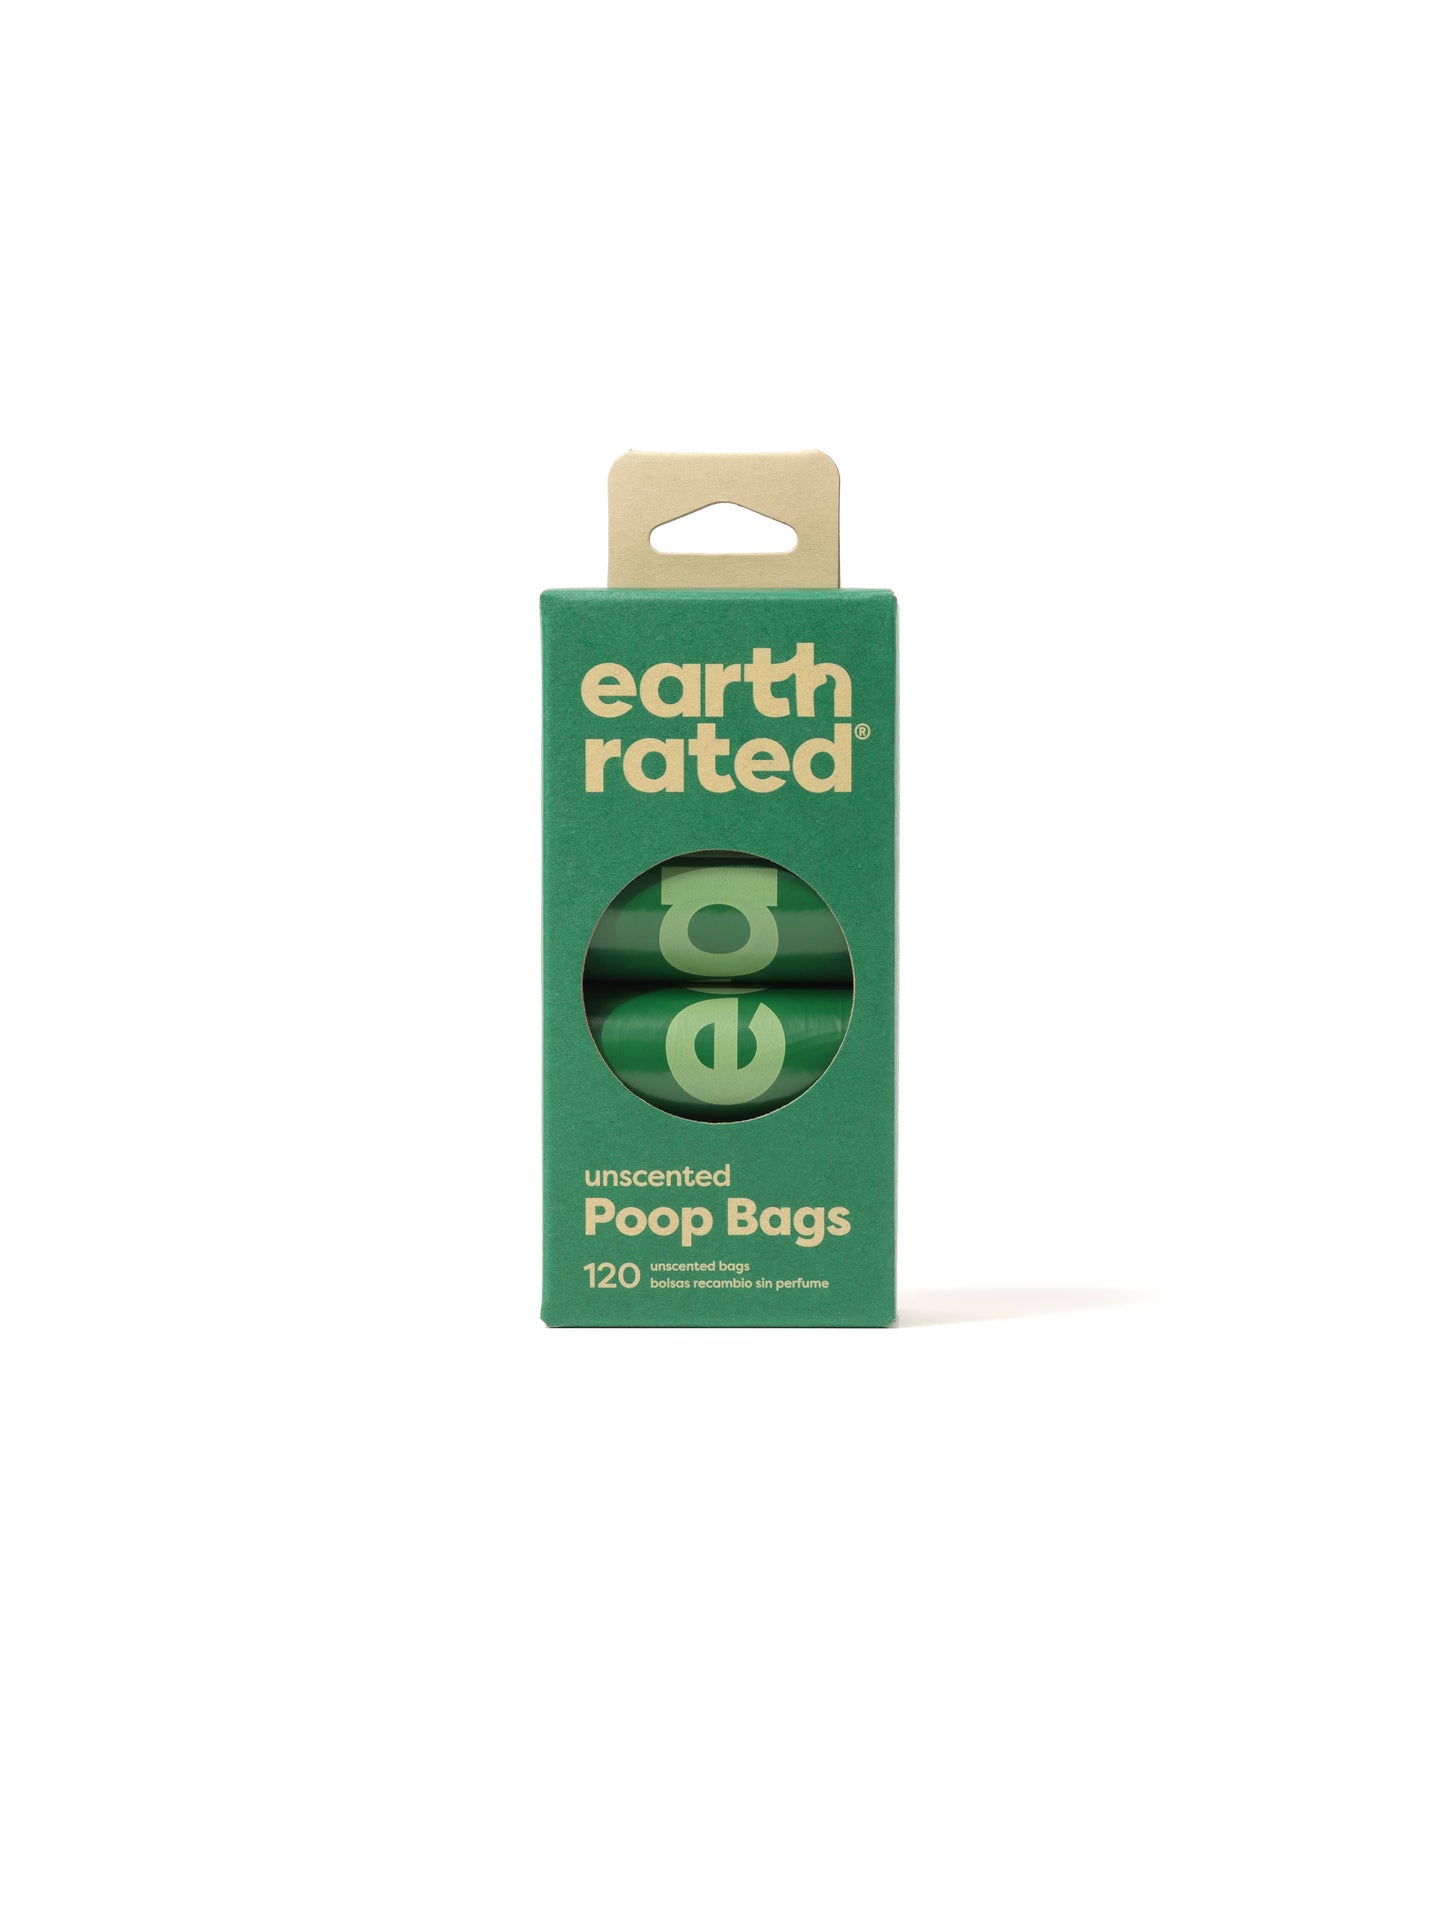 Earth Rated Unscented Poop Bags 120ct on 8 Refill Rolls 12cs